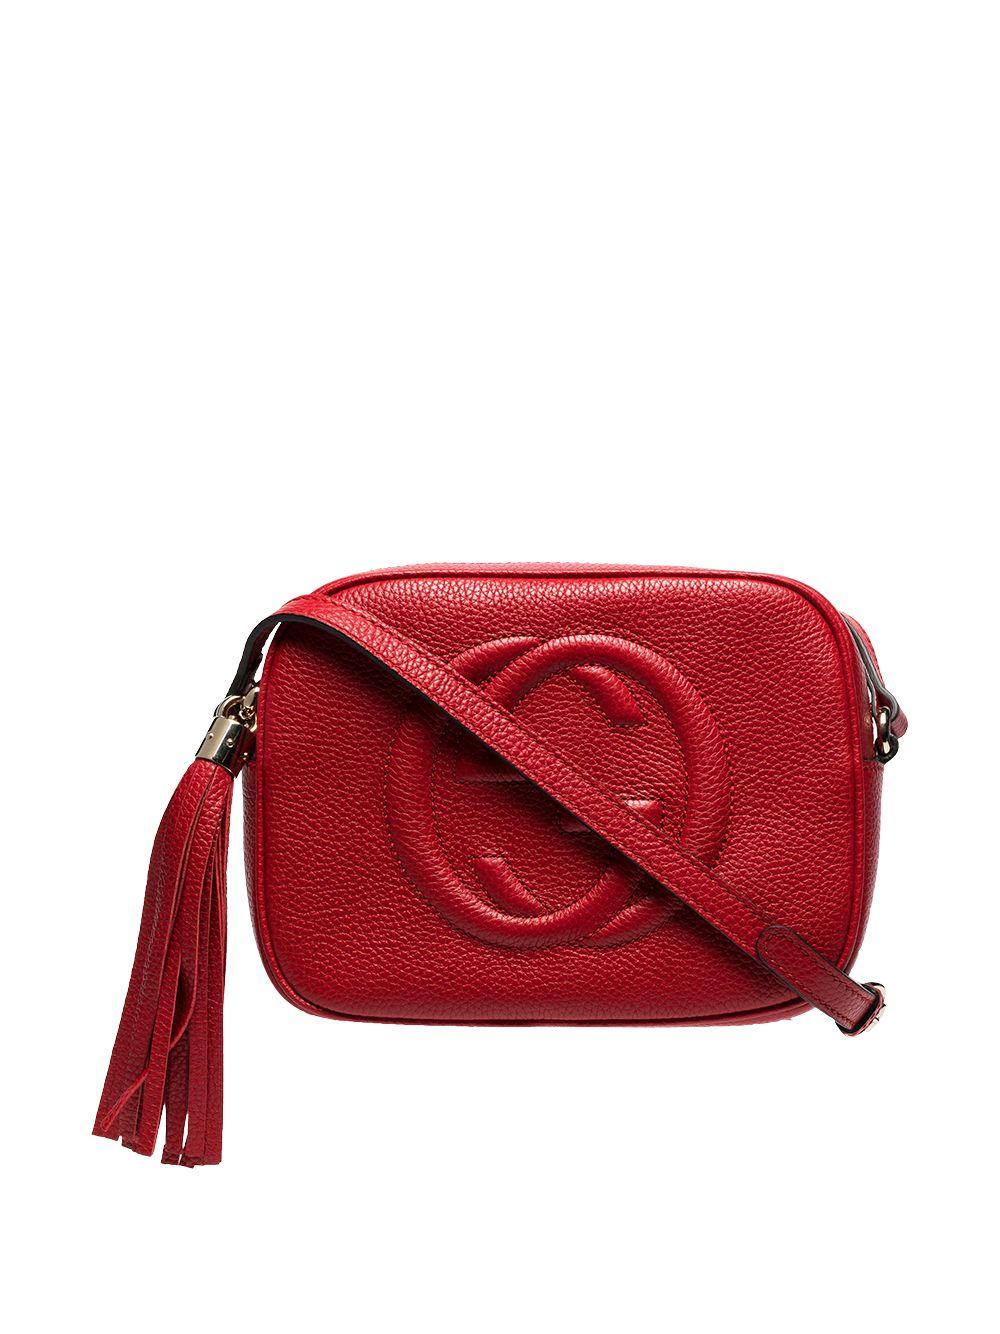 Gucci Leather Soho Crossbody Bag in Red - Lyst